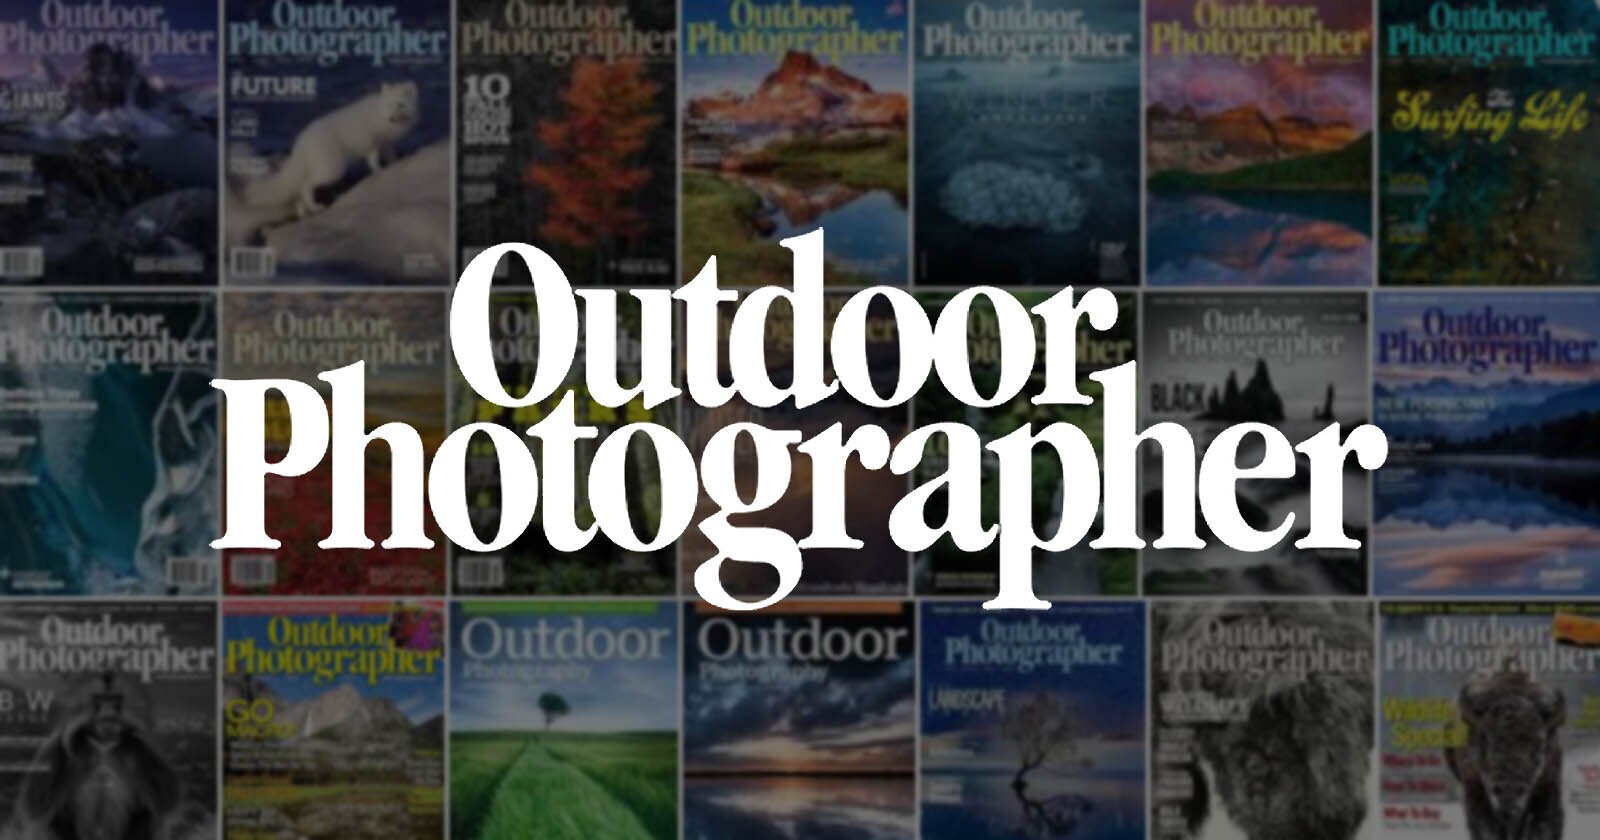 Outdoor Photographer Grossly Mismanaged as Contributors Go Unpaid for Months